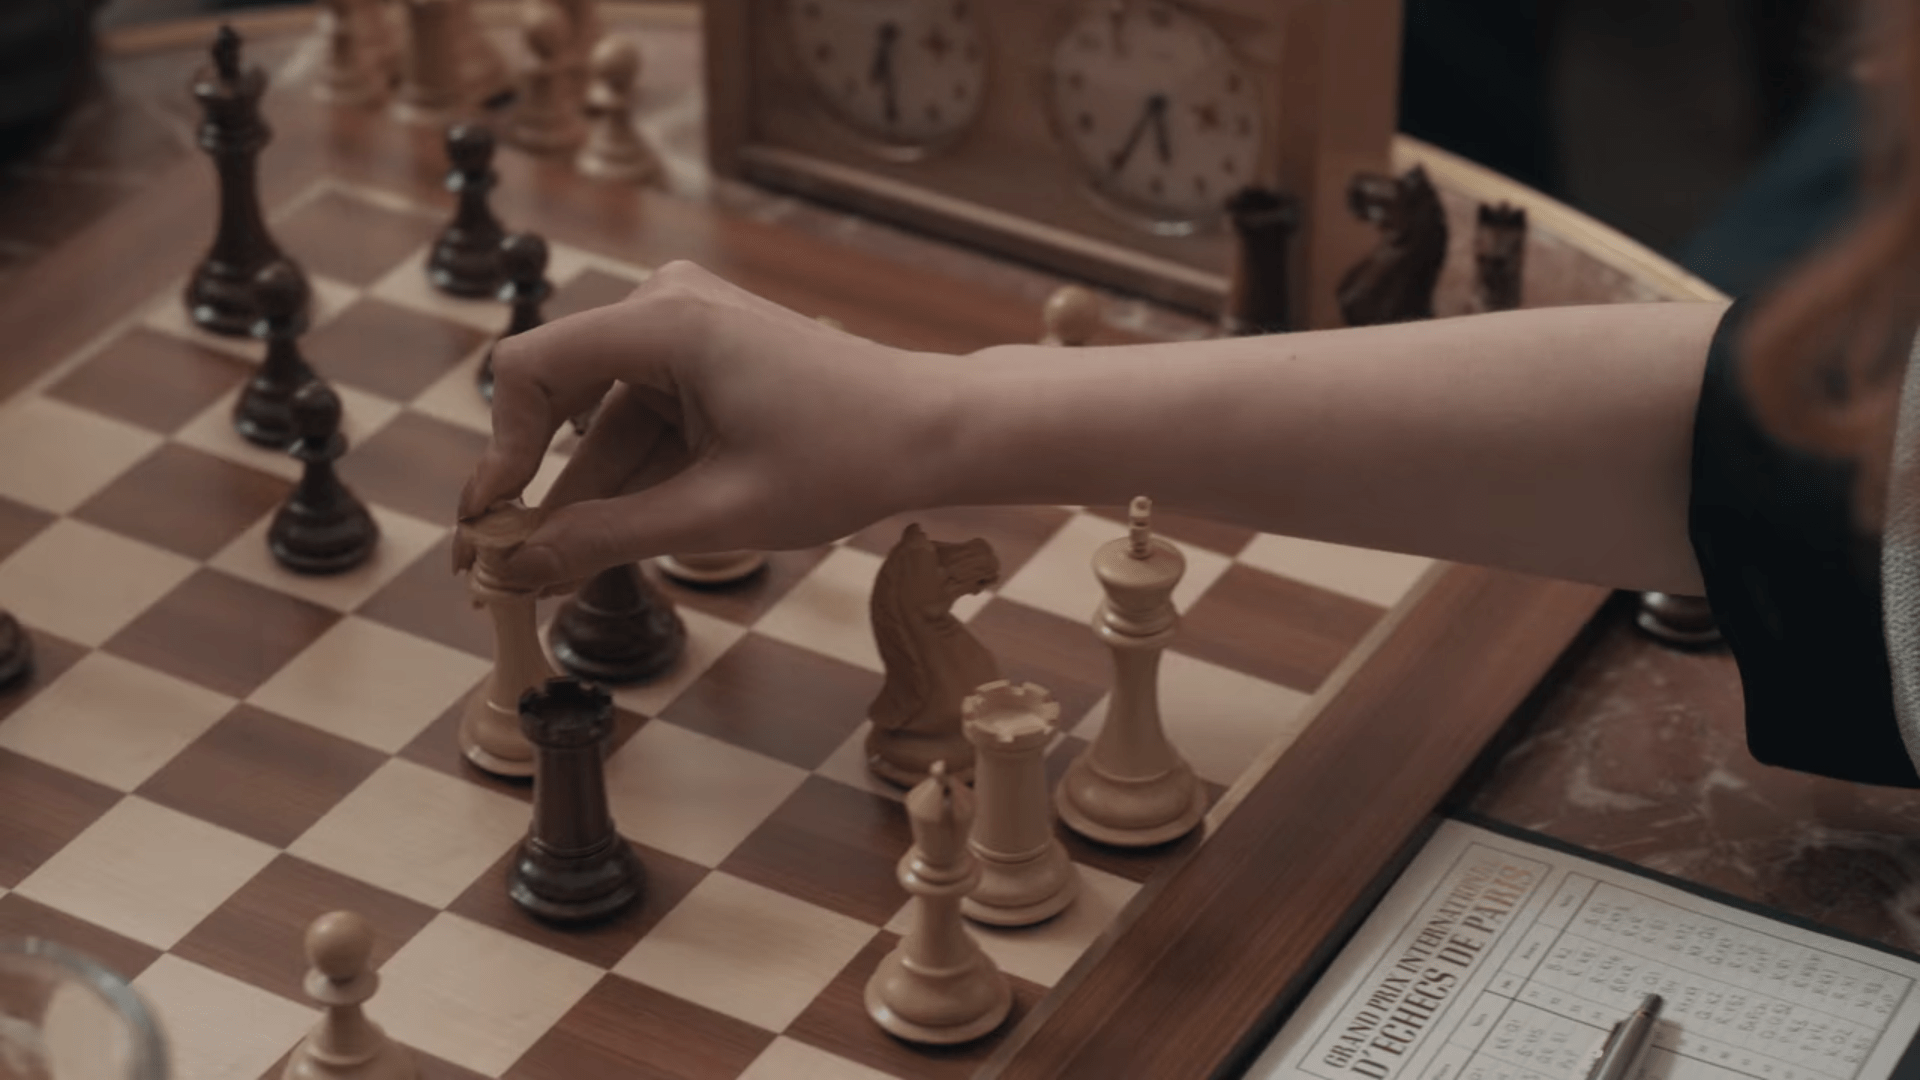 Chess opening position, Queen's gambit, accepting, learning chess